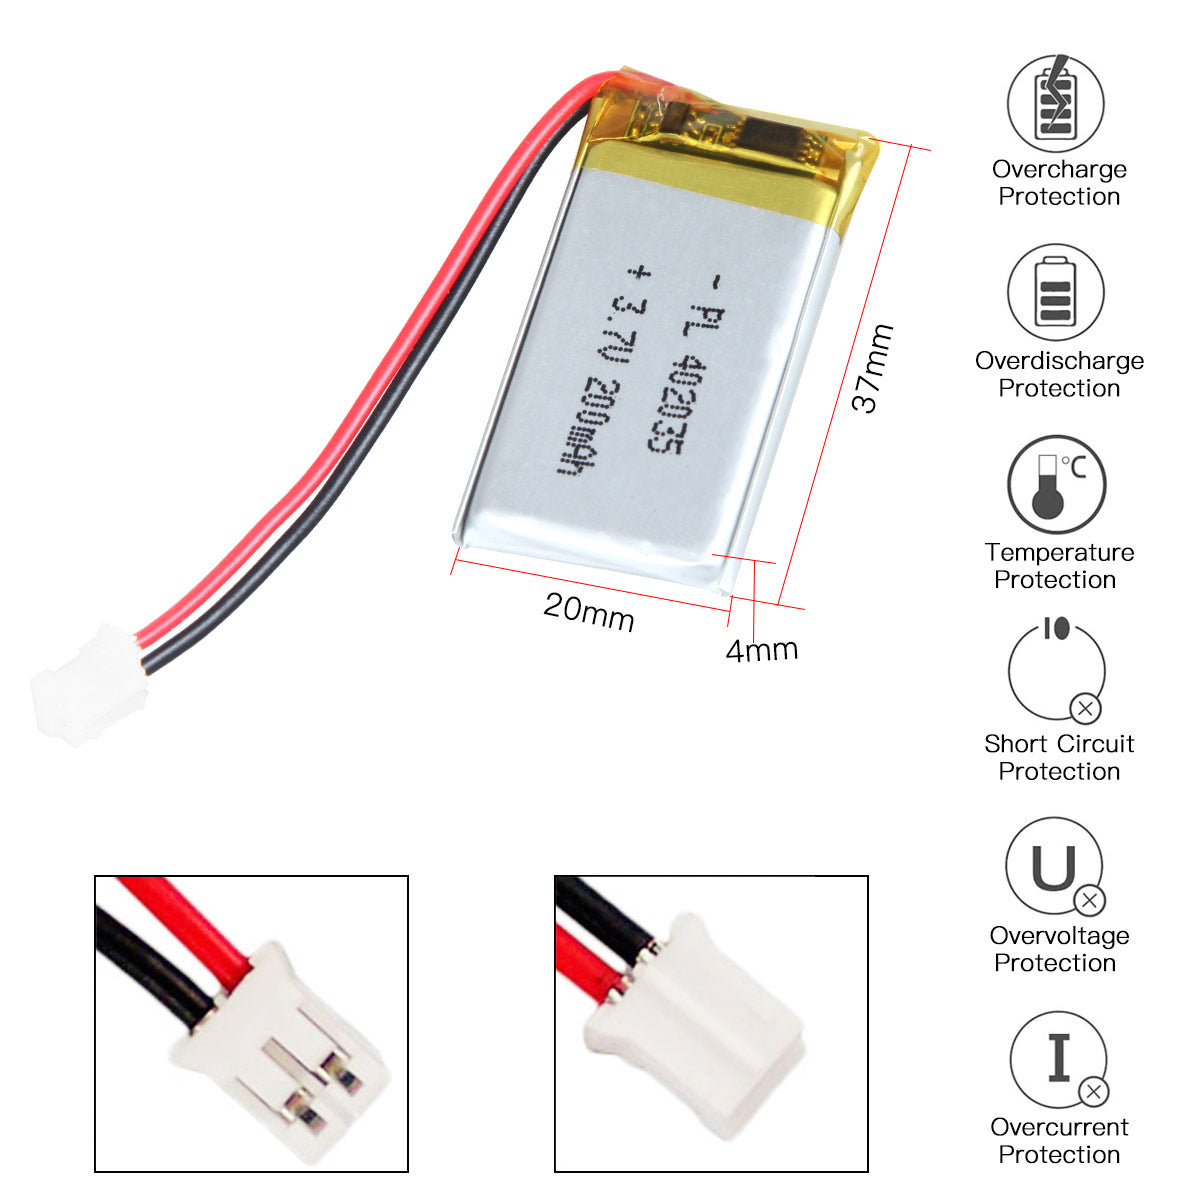 YDL 3.7V 200mAh 402035 Rechargeable Lithium Polymer Battery Length 37mm